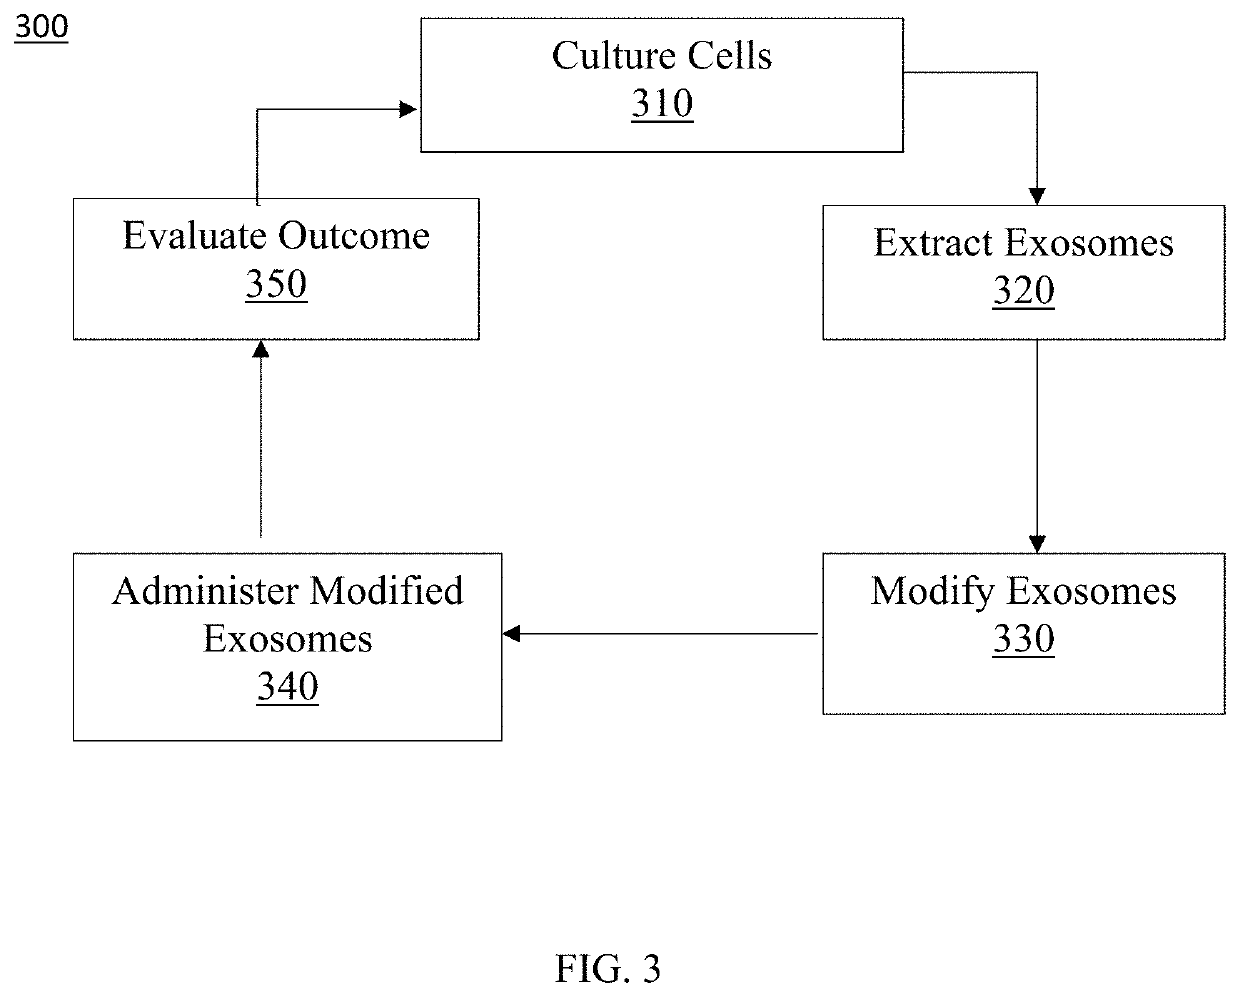 Exosome loaded therapeutics for the treatment of non-alcoholic steatohepatitis, diabetes mellitus type 1 and type 2, atherosclerotic cardiovascular disease, and alpha 1 antitrypsin deficiency